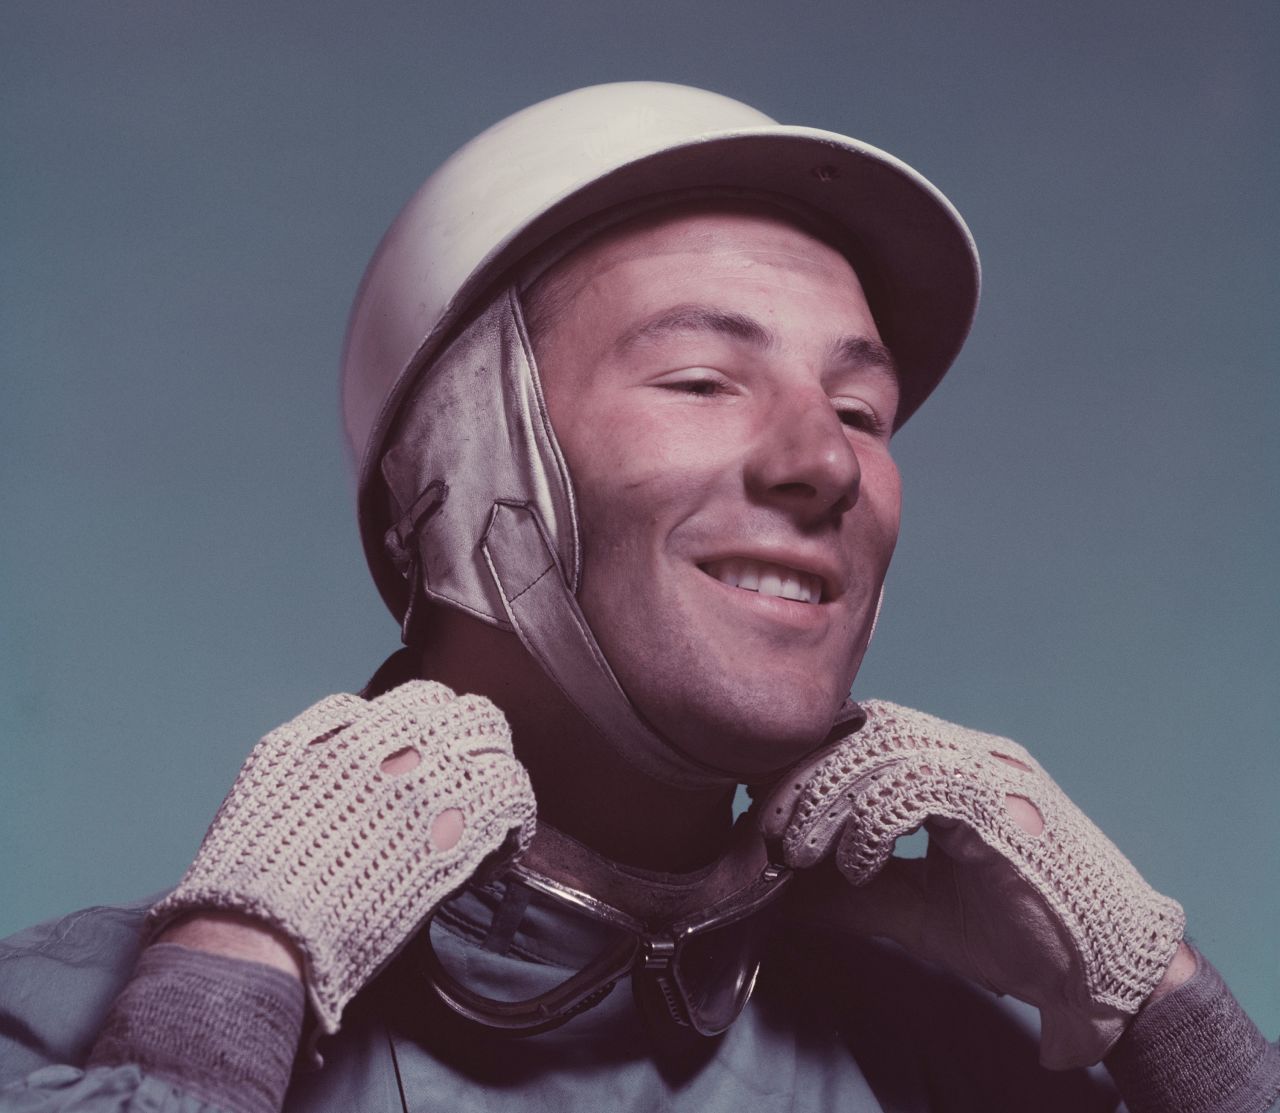 <a href="https://www.cnn.com/2020/04/12/motorsport/motorsport-legend-stirling-moss-dies-gbr-intl-spt/index.html" target="_blank">Stirling Moss</a>, a British motor racing legend widely considered one of the greatest drivers never to win a Formula One title, died April 12 at the age of 90. Moss was an active race driver between 1948 and 1962, competing in numerous classifications and winning 212 of the 529 races he competed in.